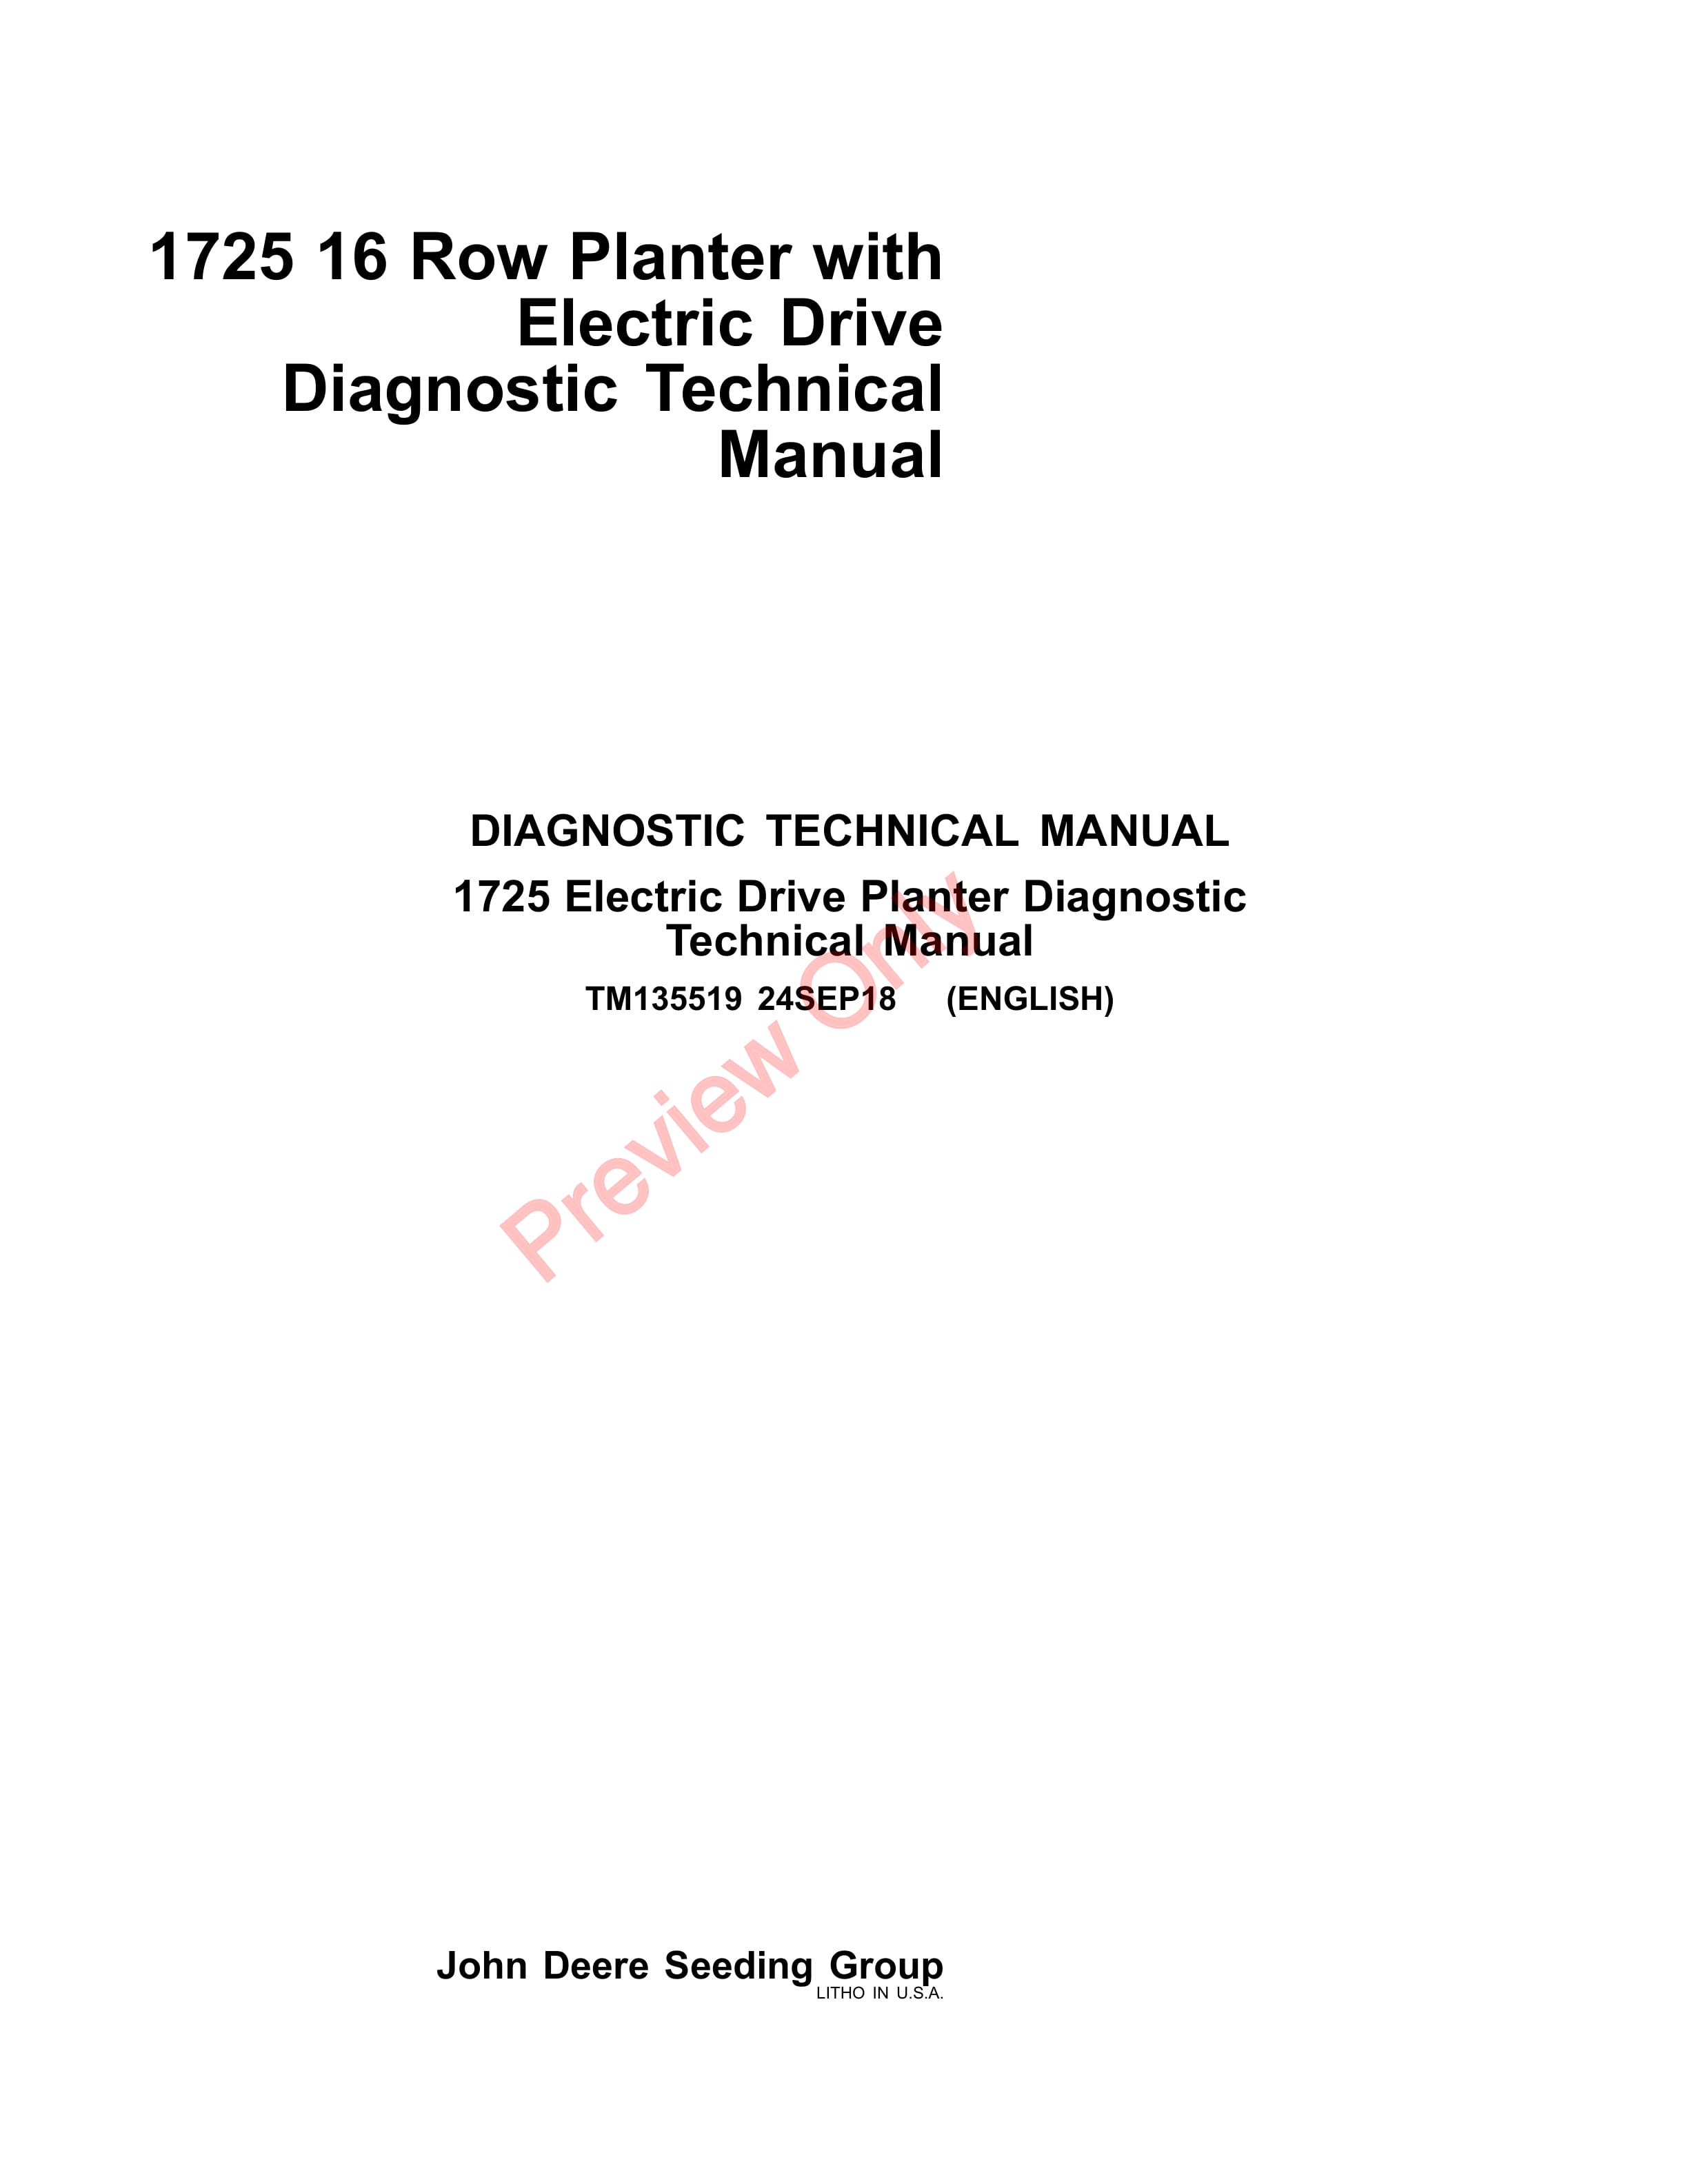 John Deere 1725 16 Row Planter with Electric Drive Diagnostic Technical Manual TM135519 24SEP18 1